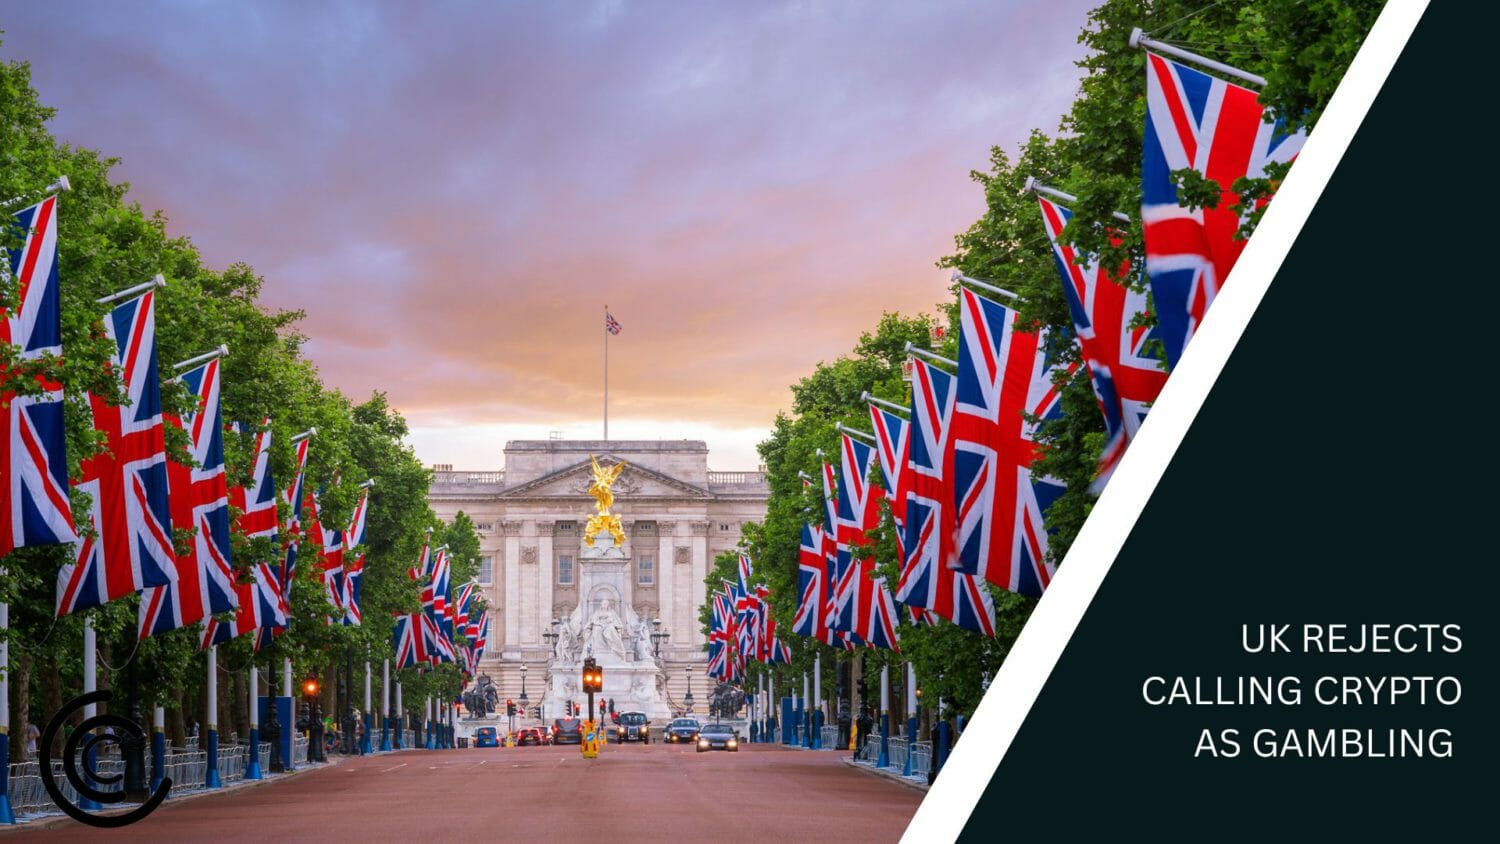 Uk Rejects Calling Crypto As Gambling